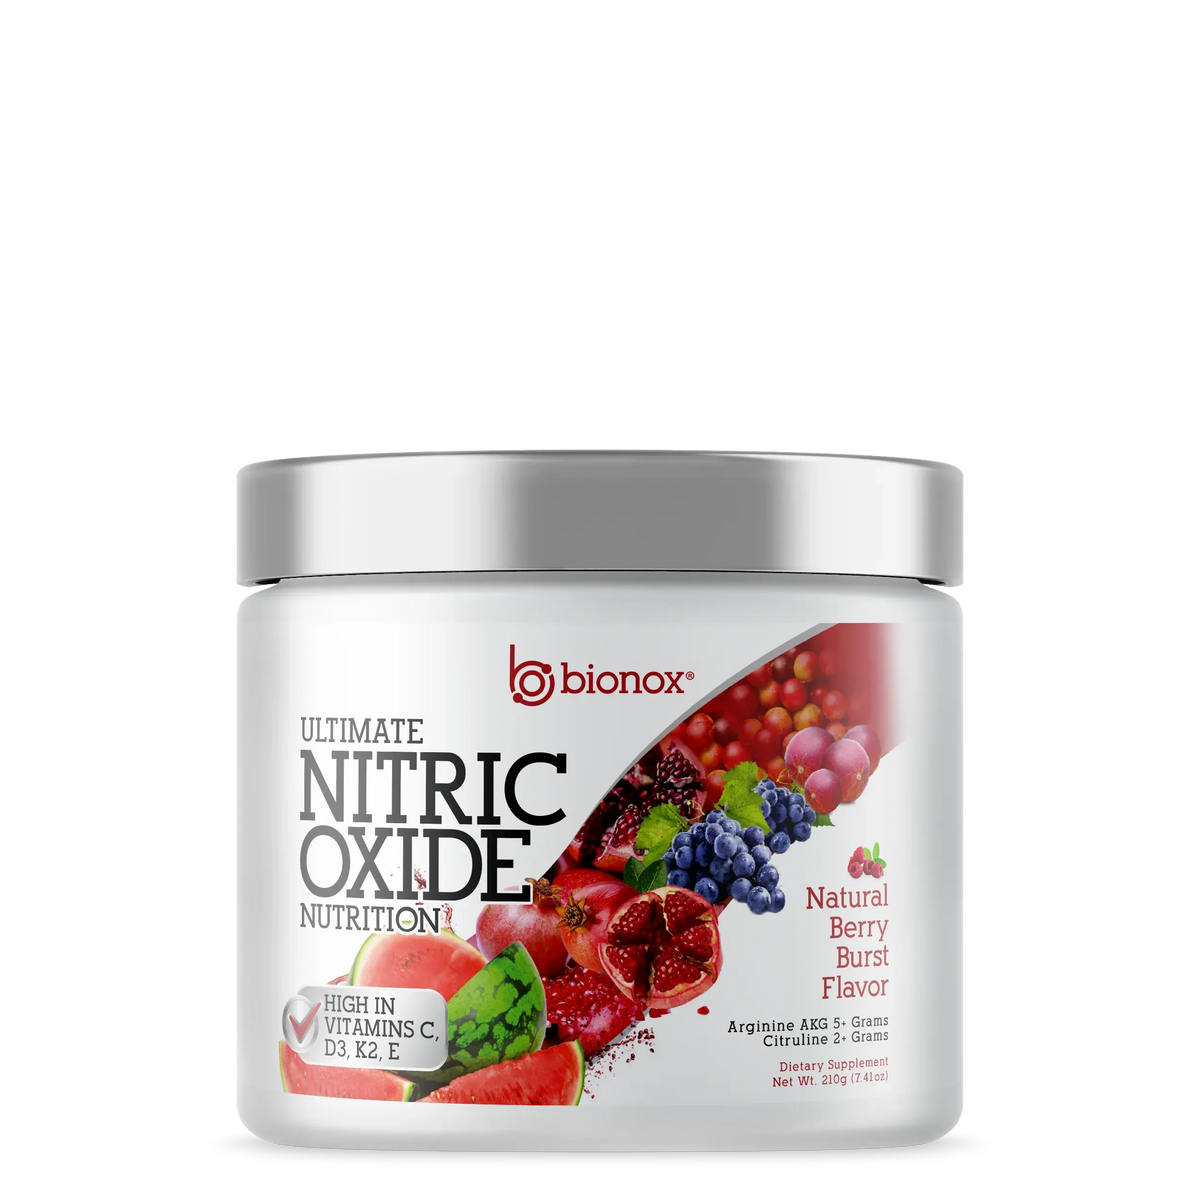 Ultimate Nitric Oxide Nutrition Berry Burst Flavor - Small - 15 Days